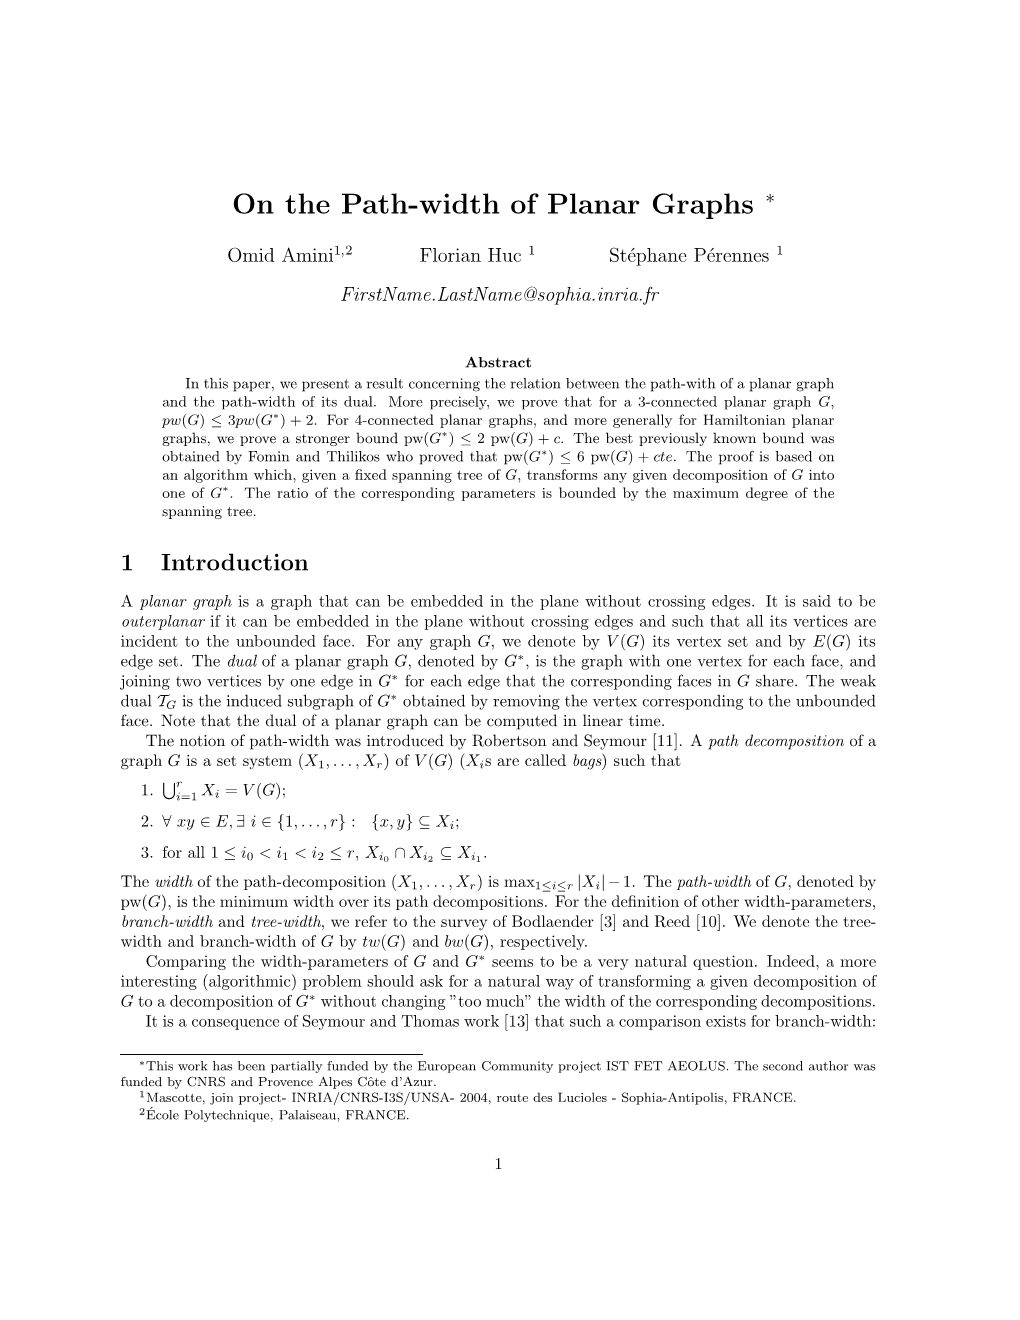 On the Path-Width of Planar Graphs ∗